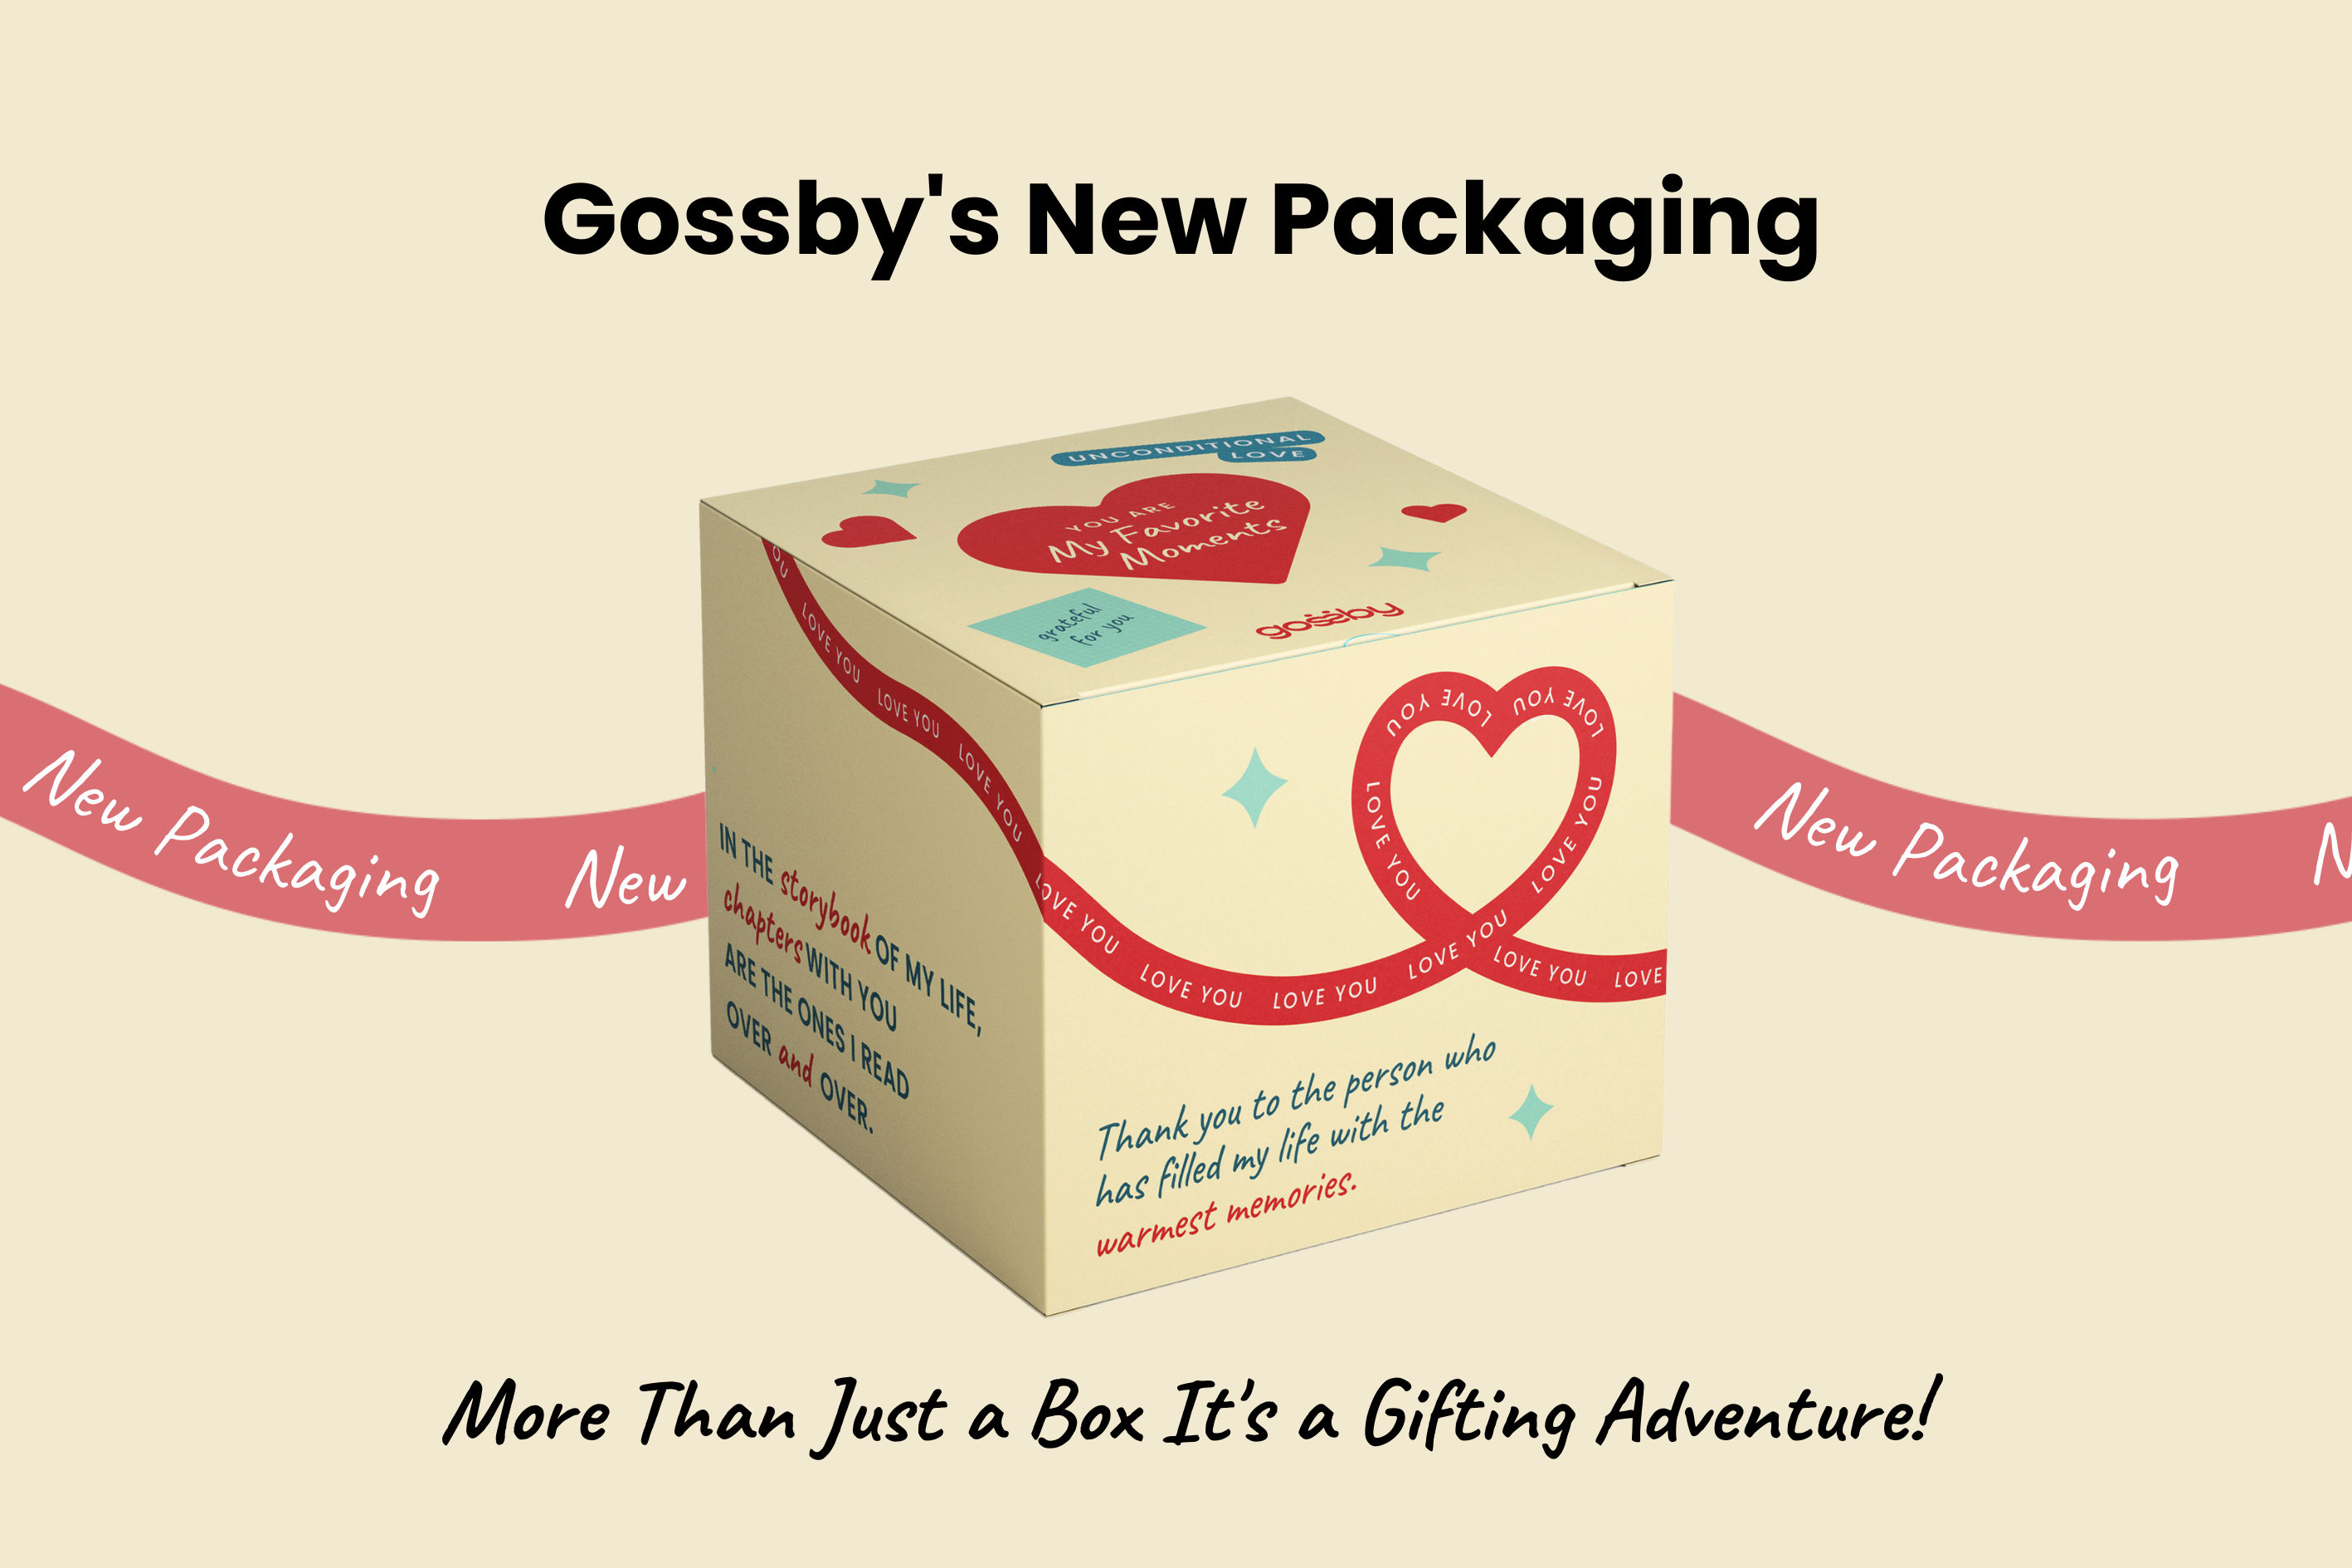 Unwrap Gossby's New Packaging: More Than Just a Box, It's a Gifting Adventure!